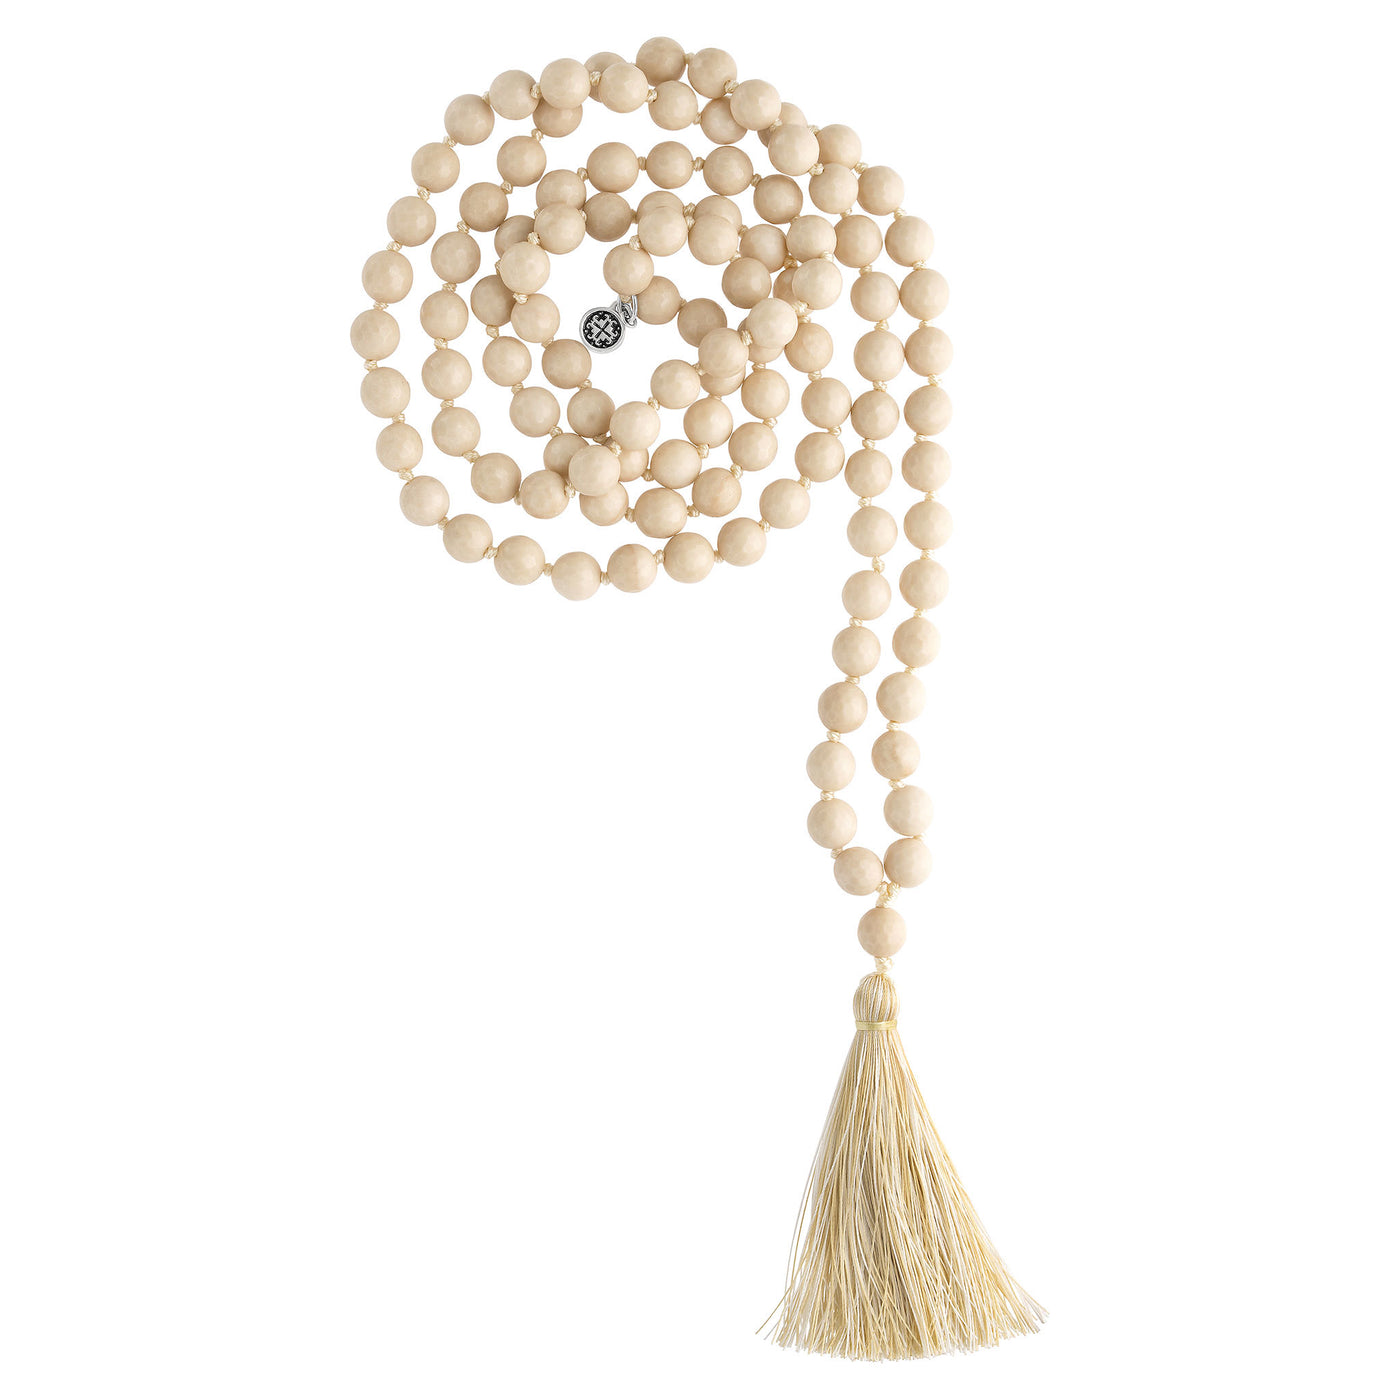 GROWTH: Riverstone Faceted 108 Bead Mala 8mm